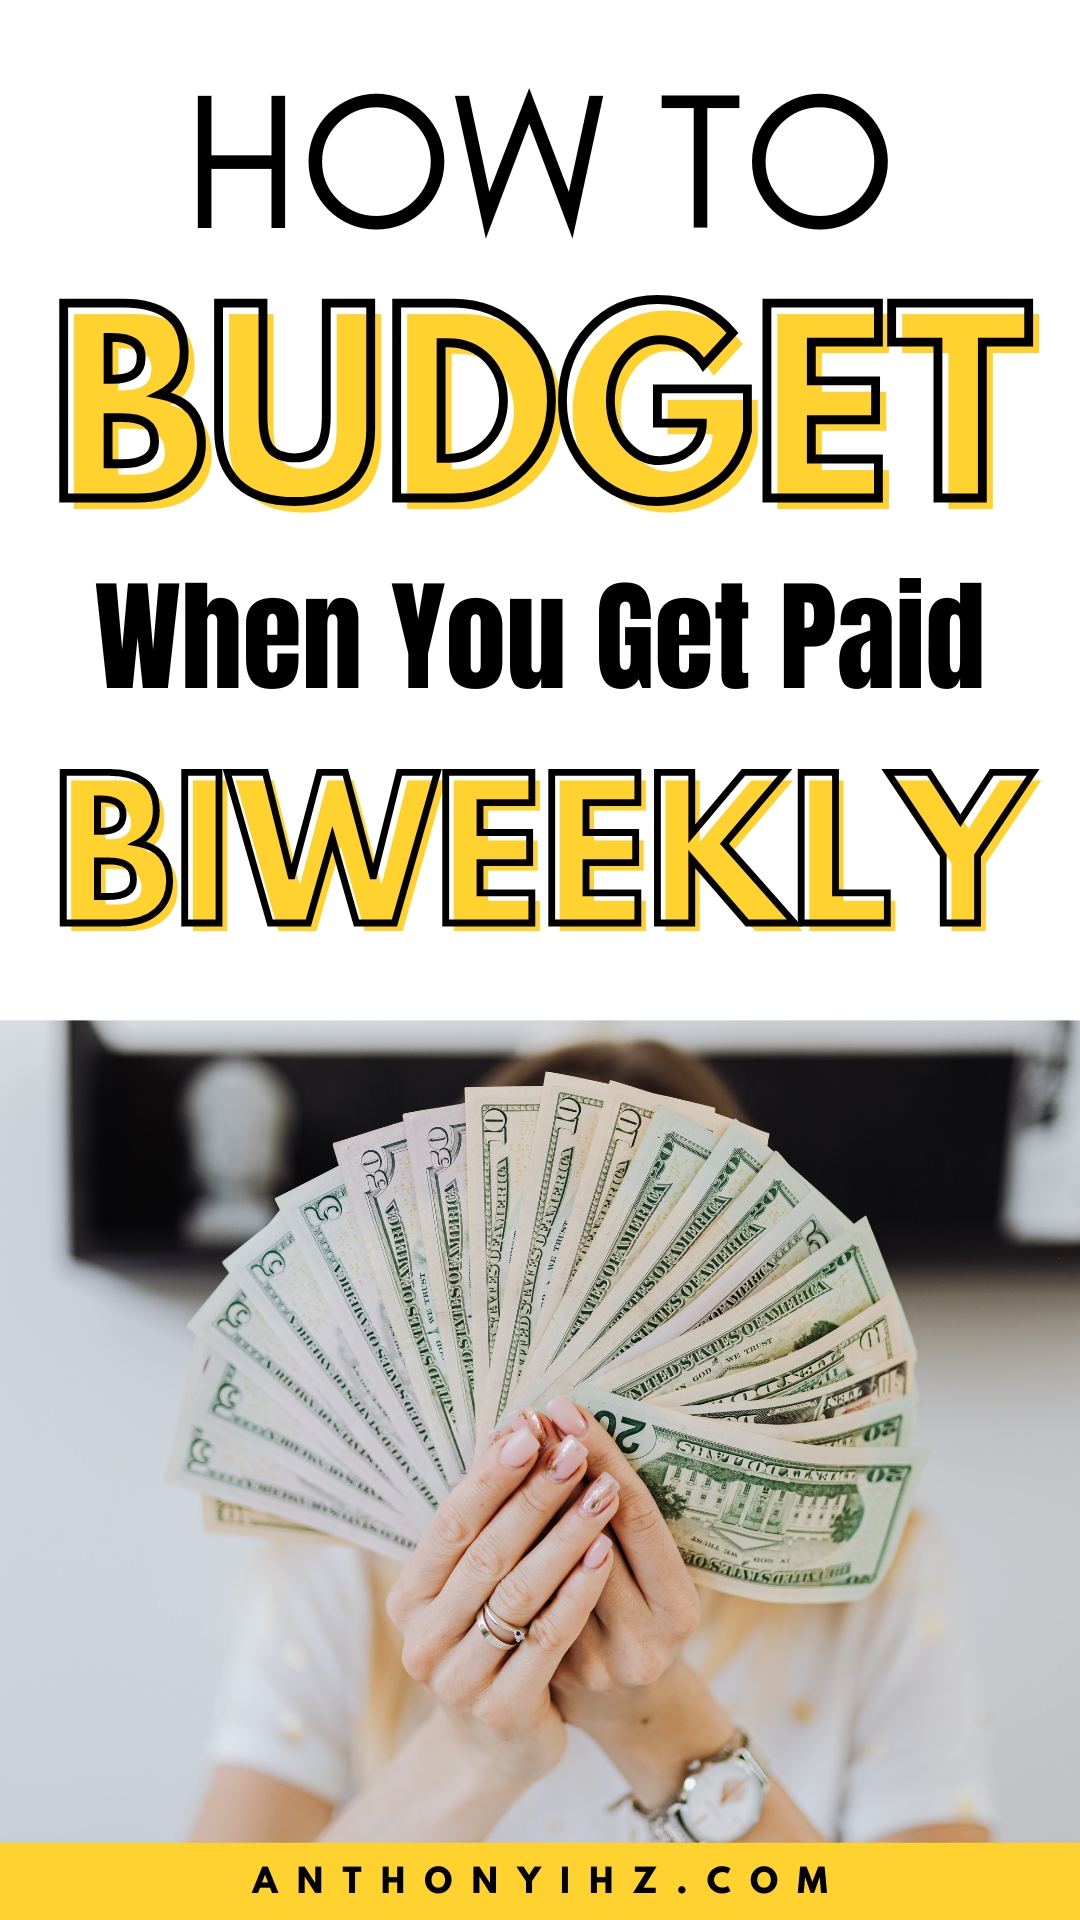 what is a biweekly budget